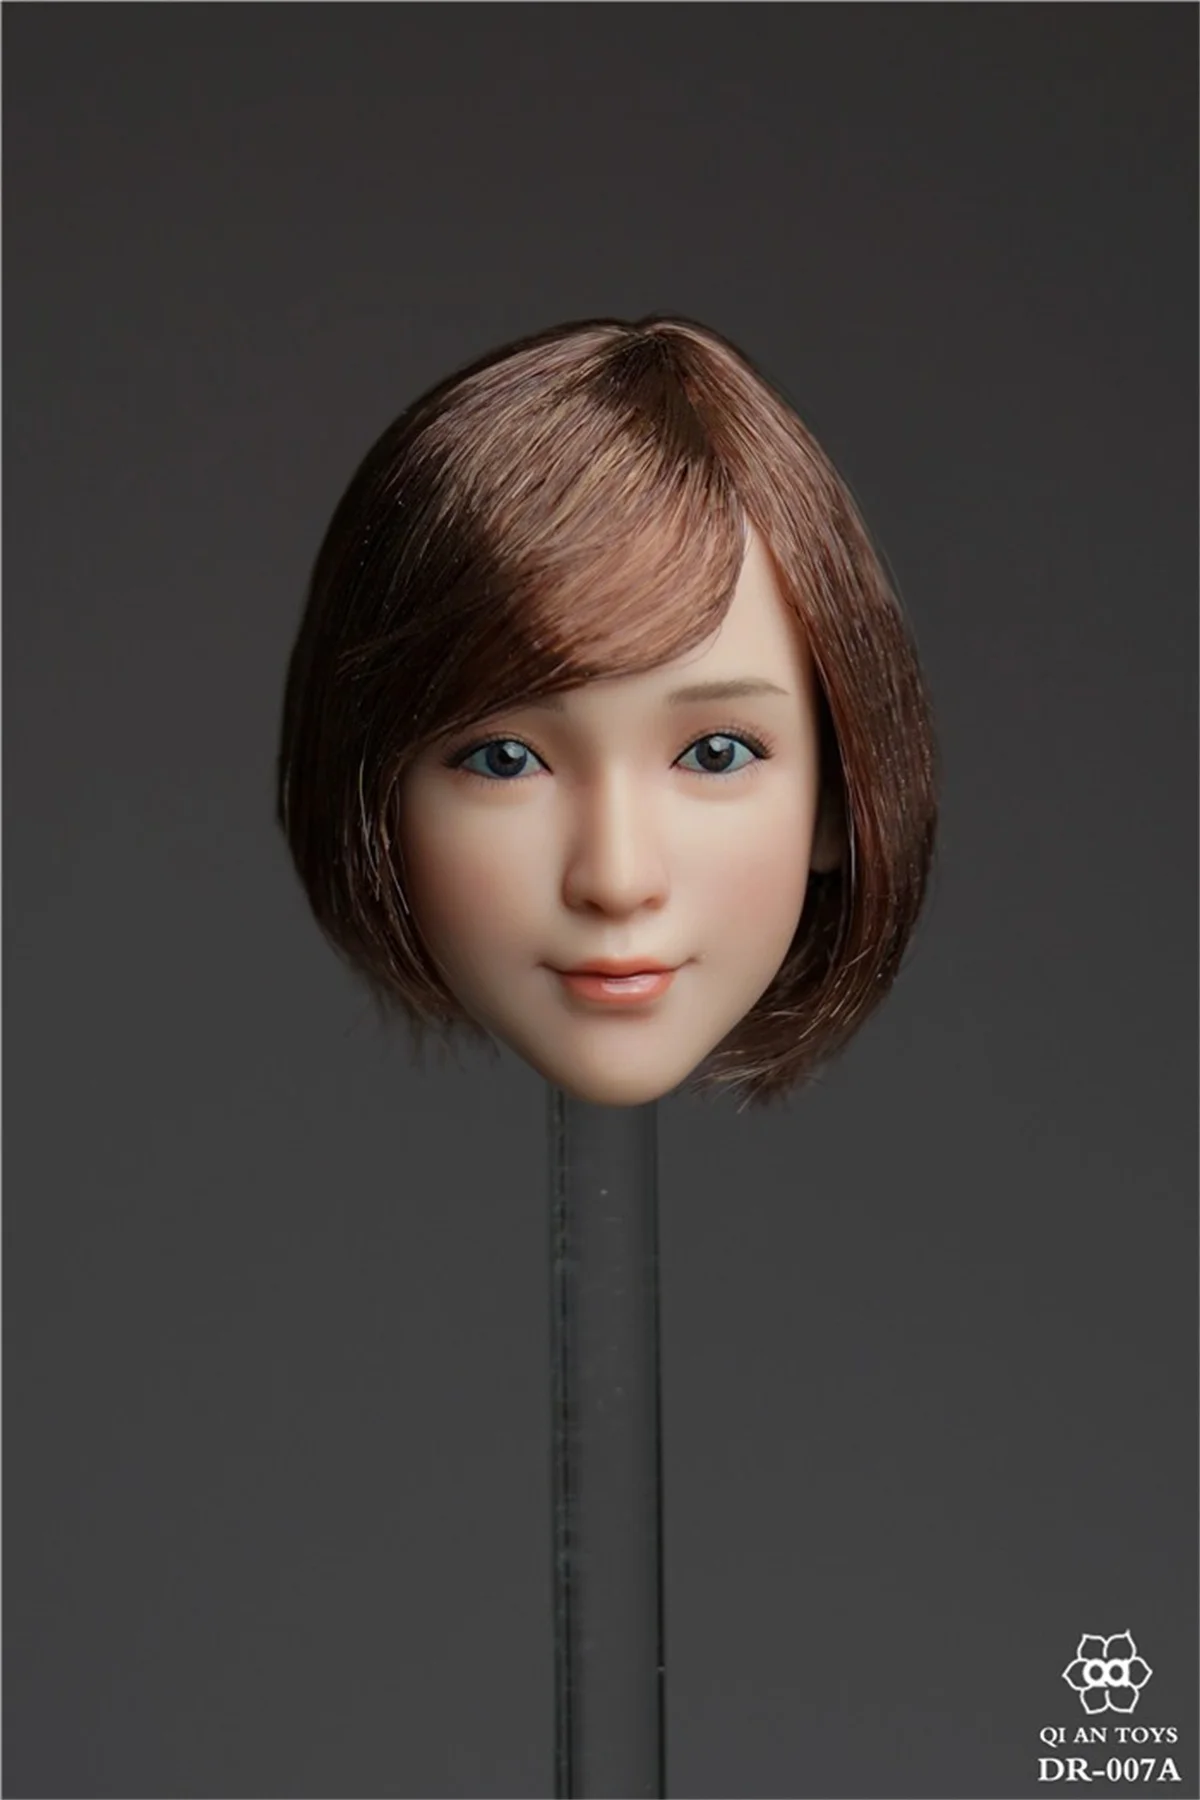 

QI AN TOYS DR-007 1/6 Scale female head sculpt Asian girl Planted Brown Black Hair fit 12 inches action figure body model